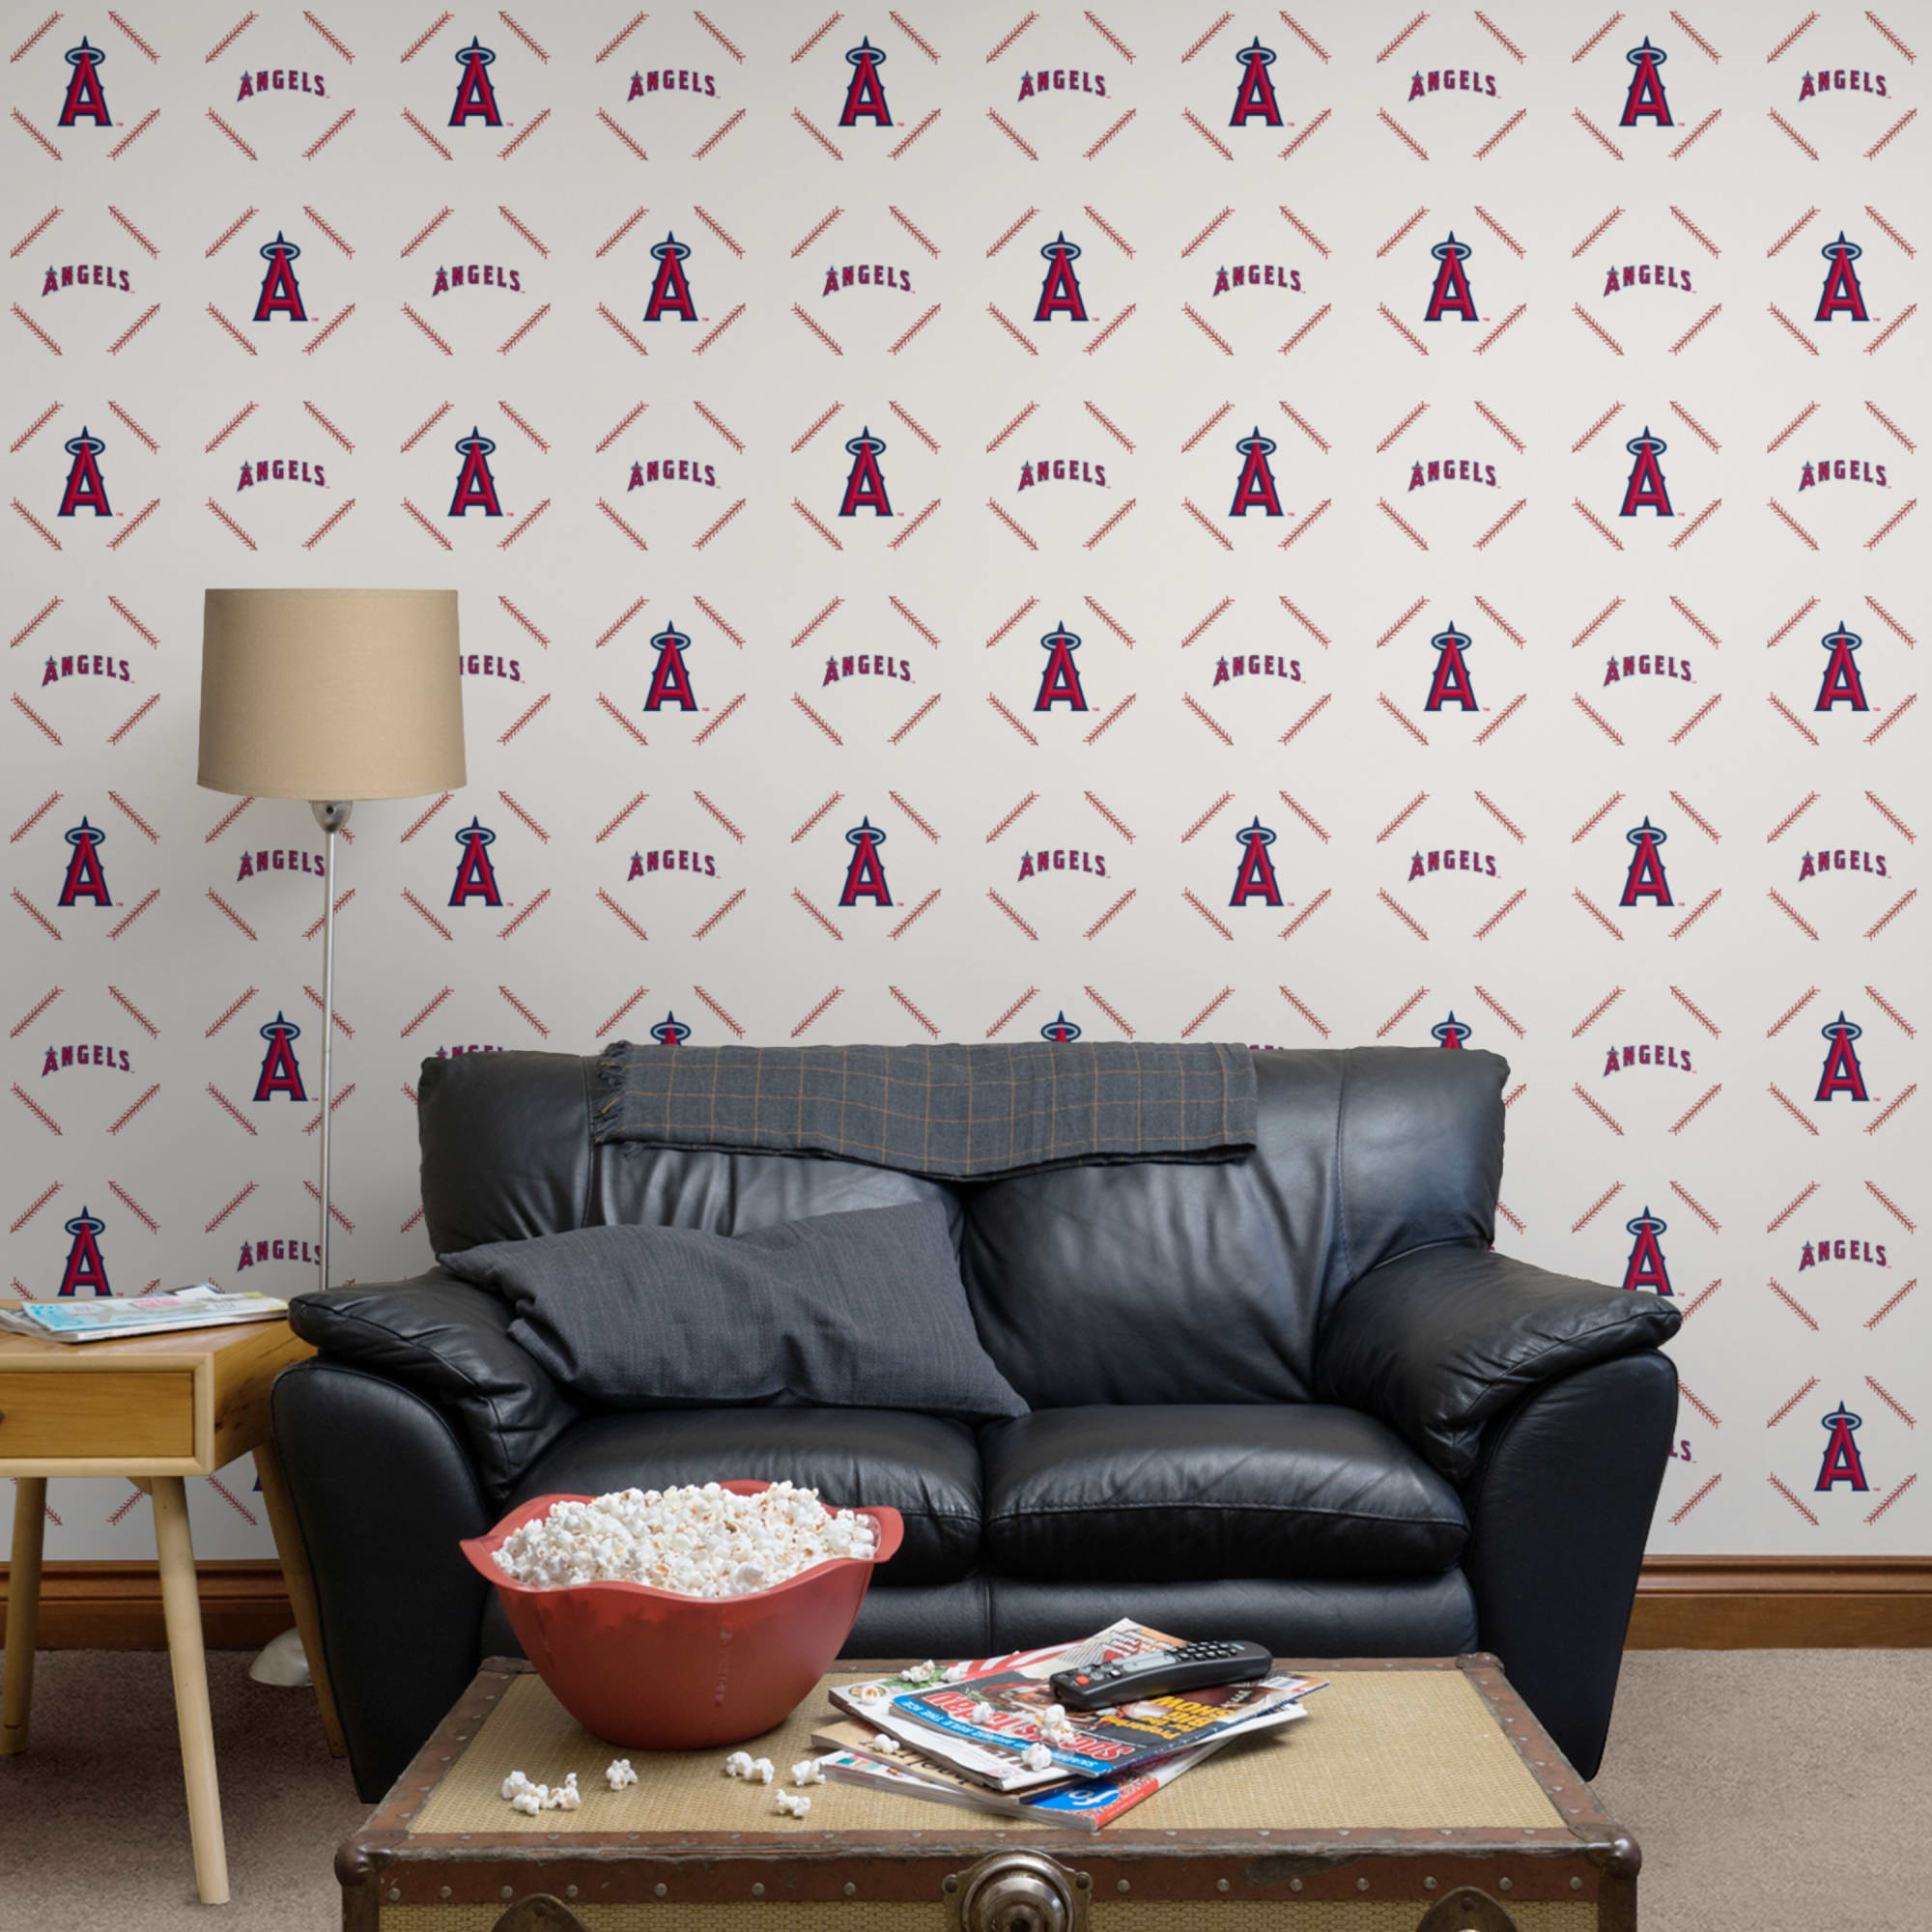 LA Angels: Stitch Pattern - Officially Licensed Removable Wallpaper 12" x 12" Sample by Fathead